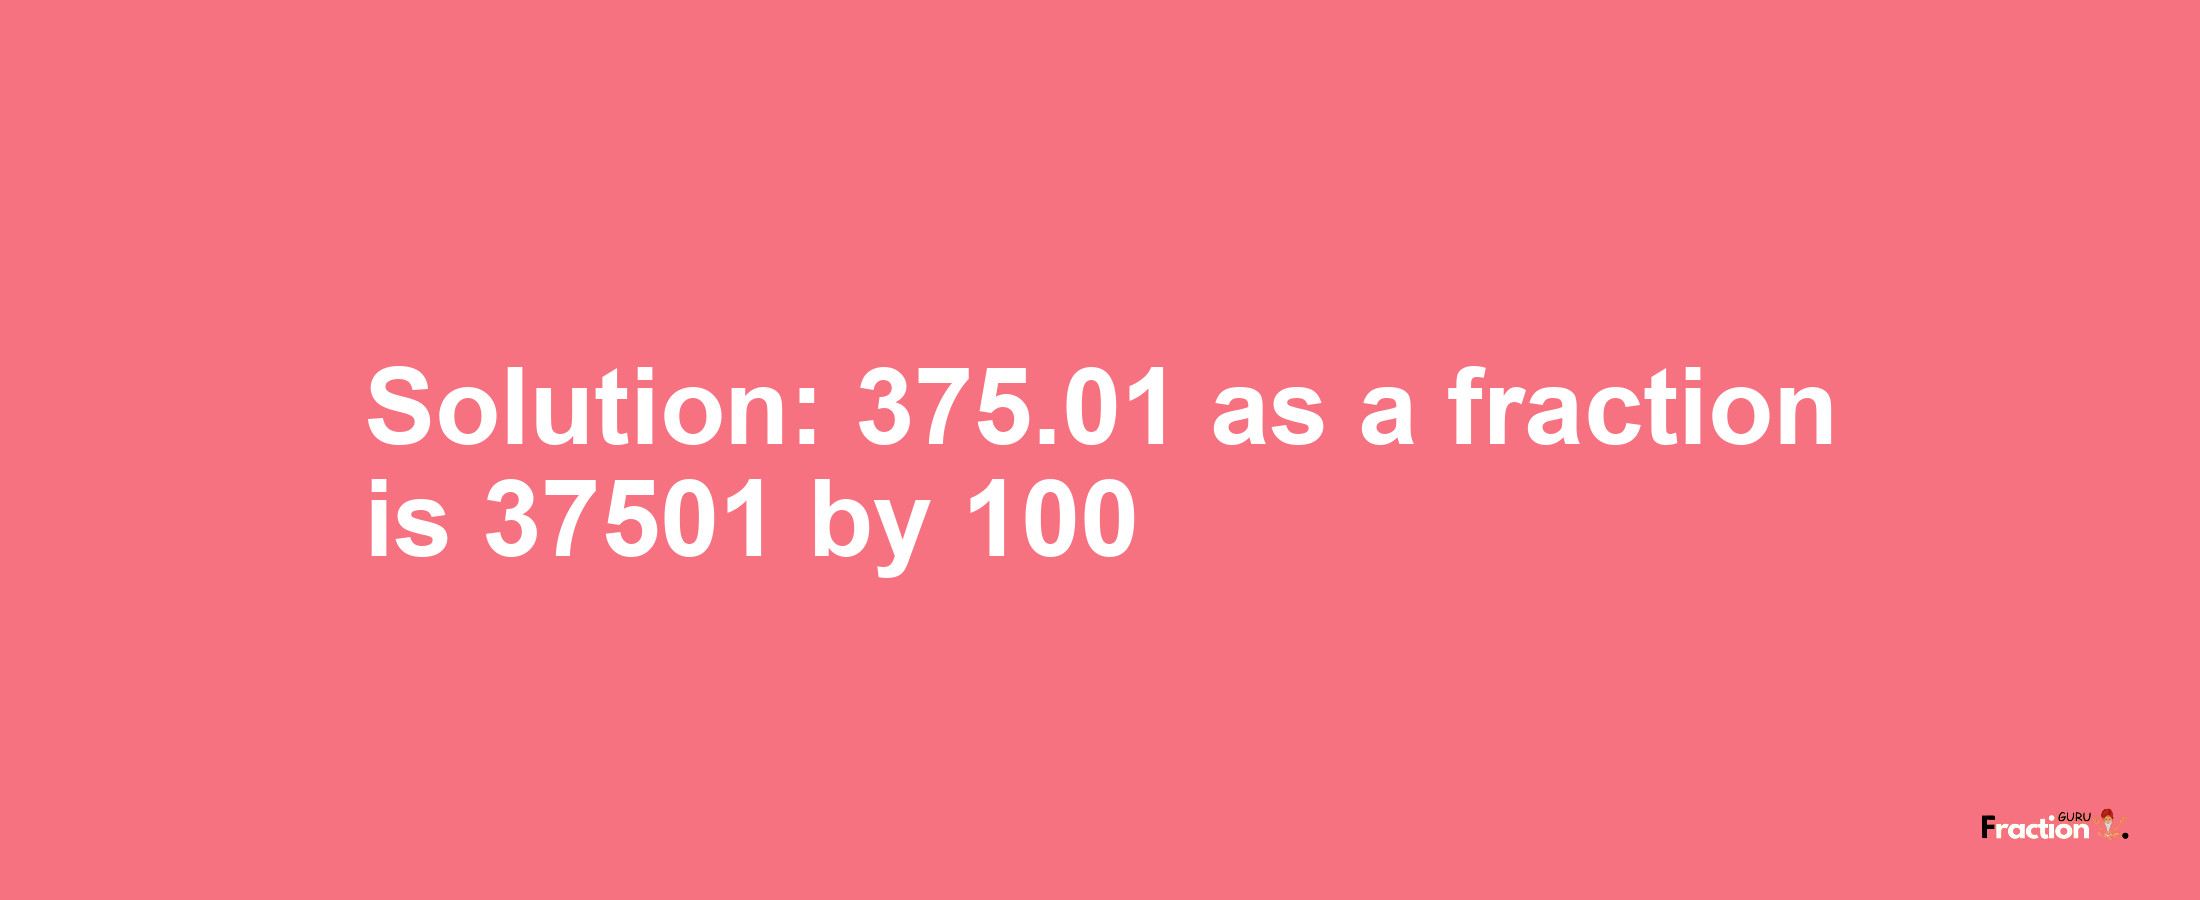 Solution:375.01 as a fraction is 37501/100